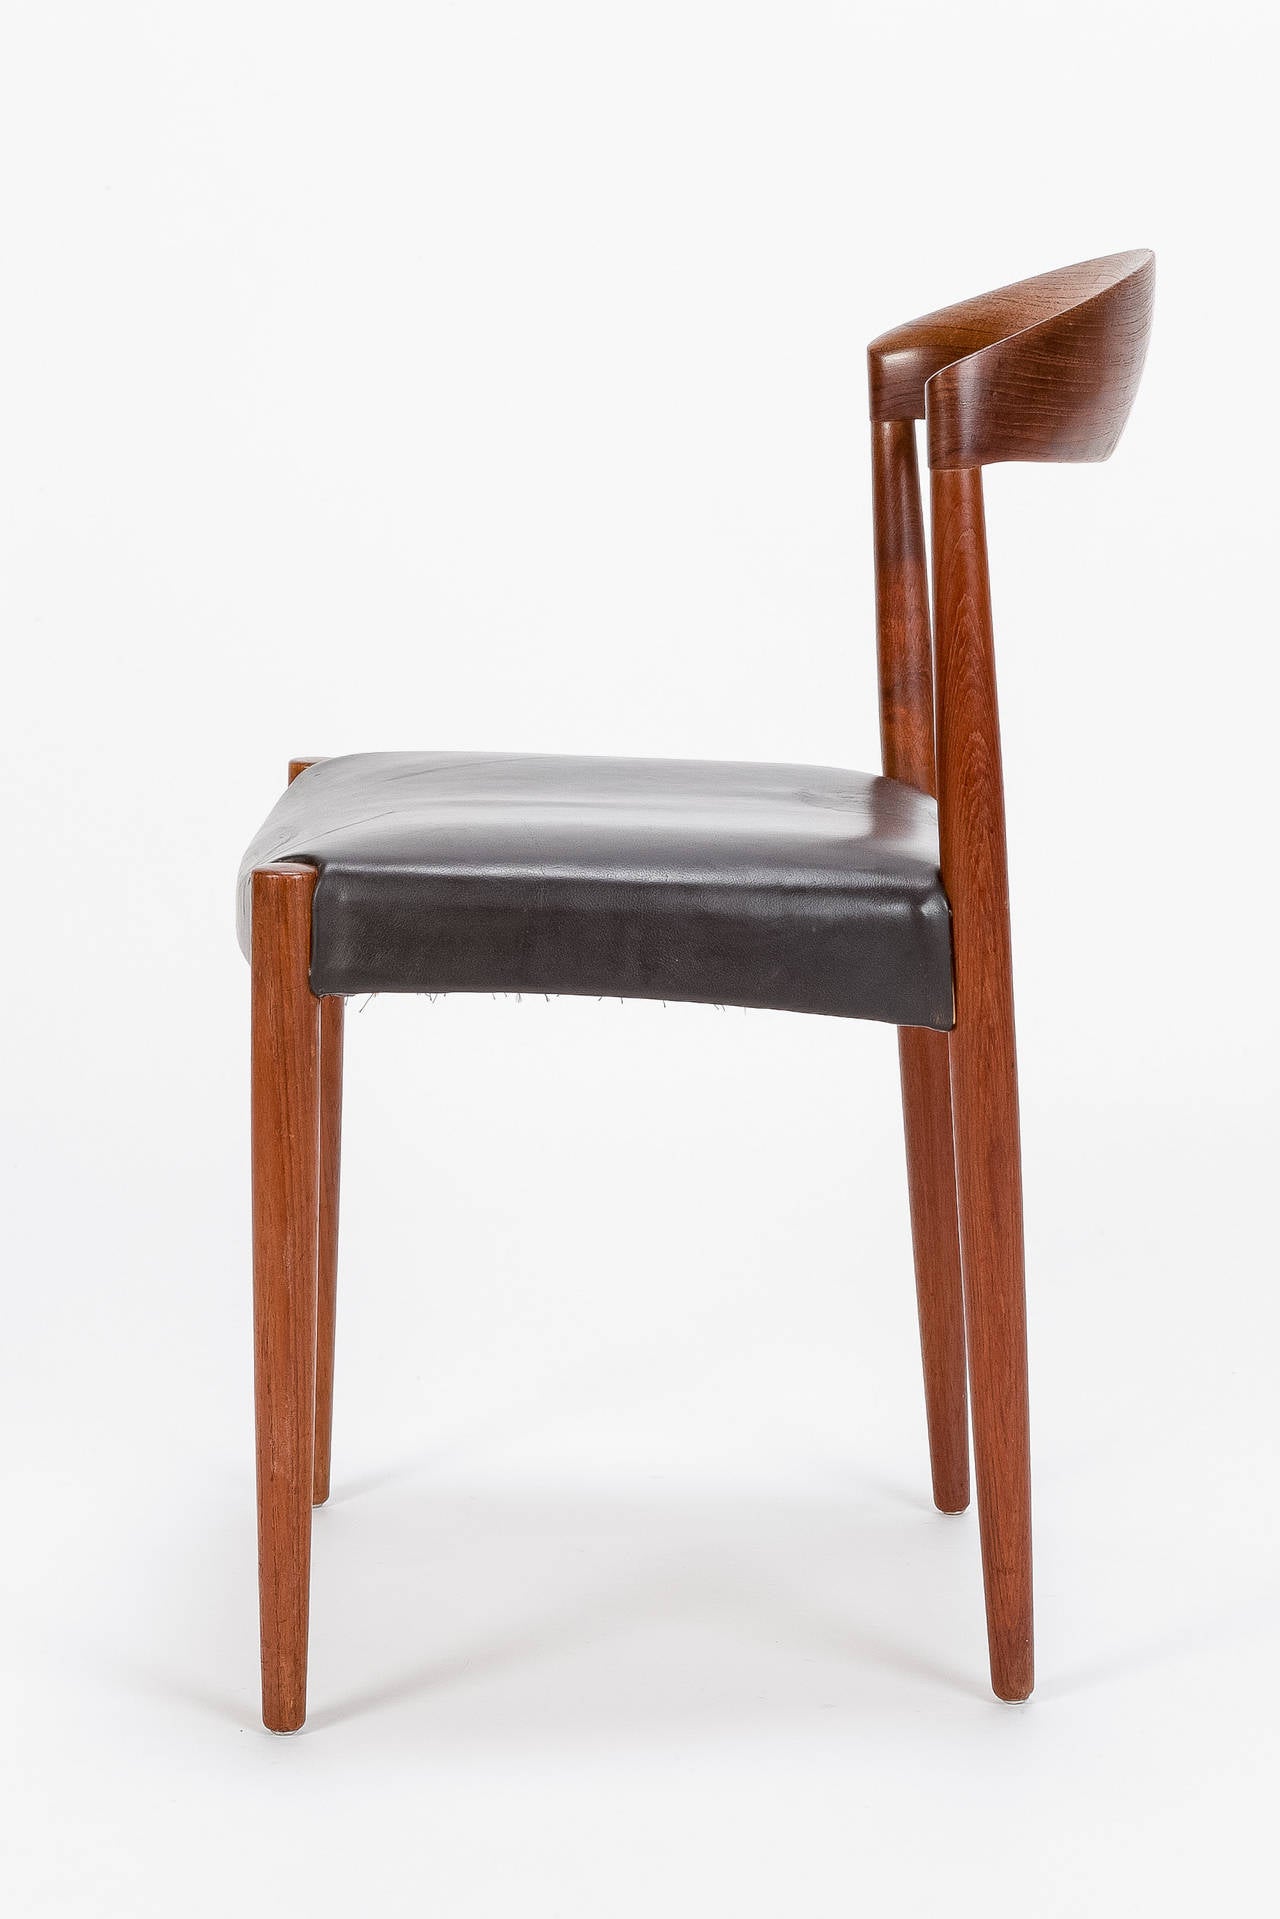 Mid-20th Century Four Danish Teak and Leather Chairs by Knud Andersen, 1960s For Sale